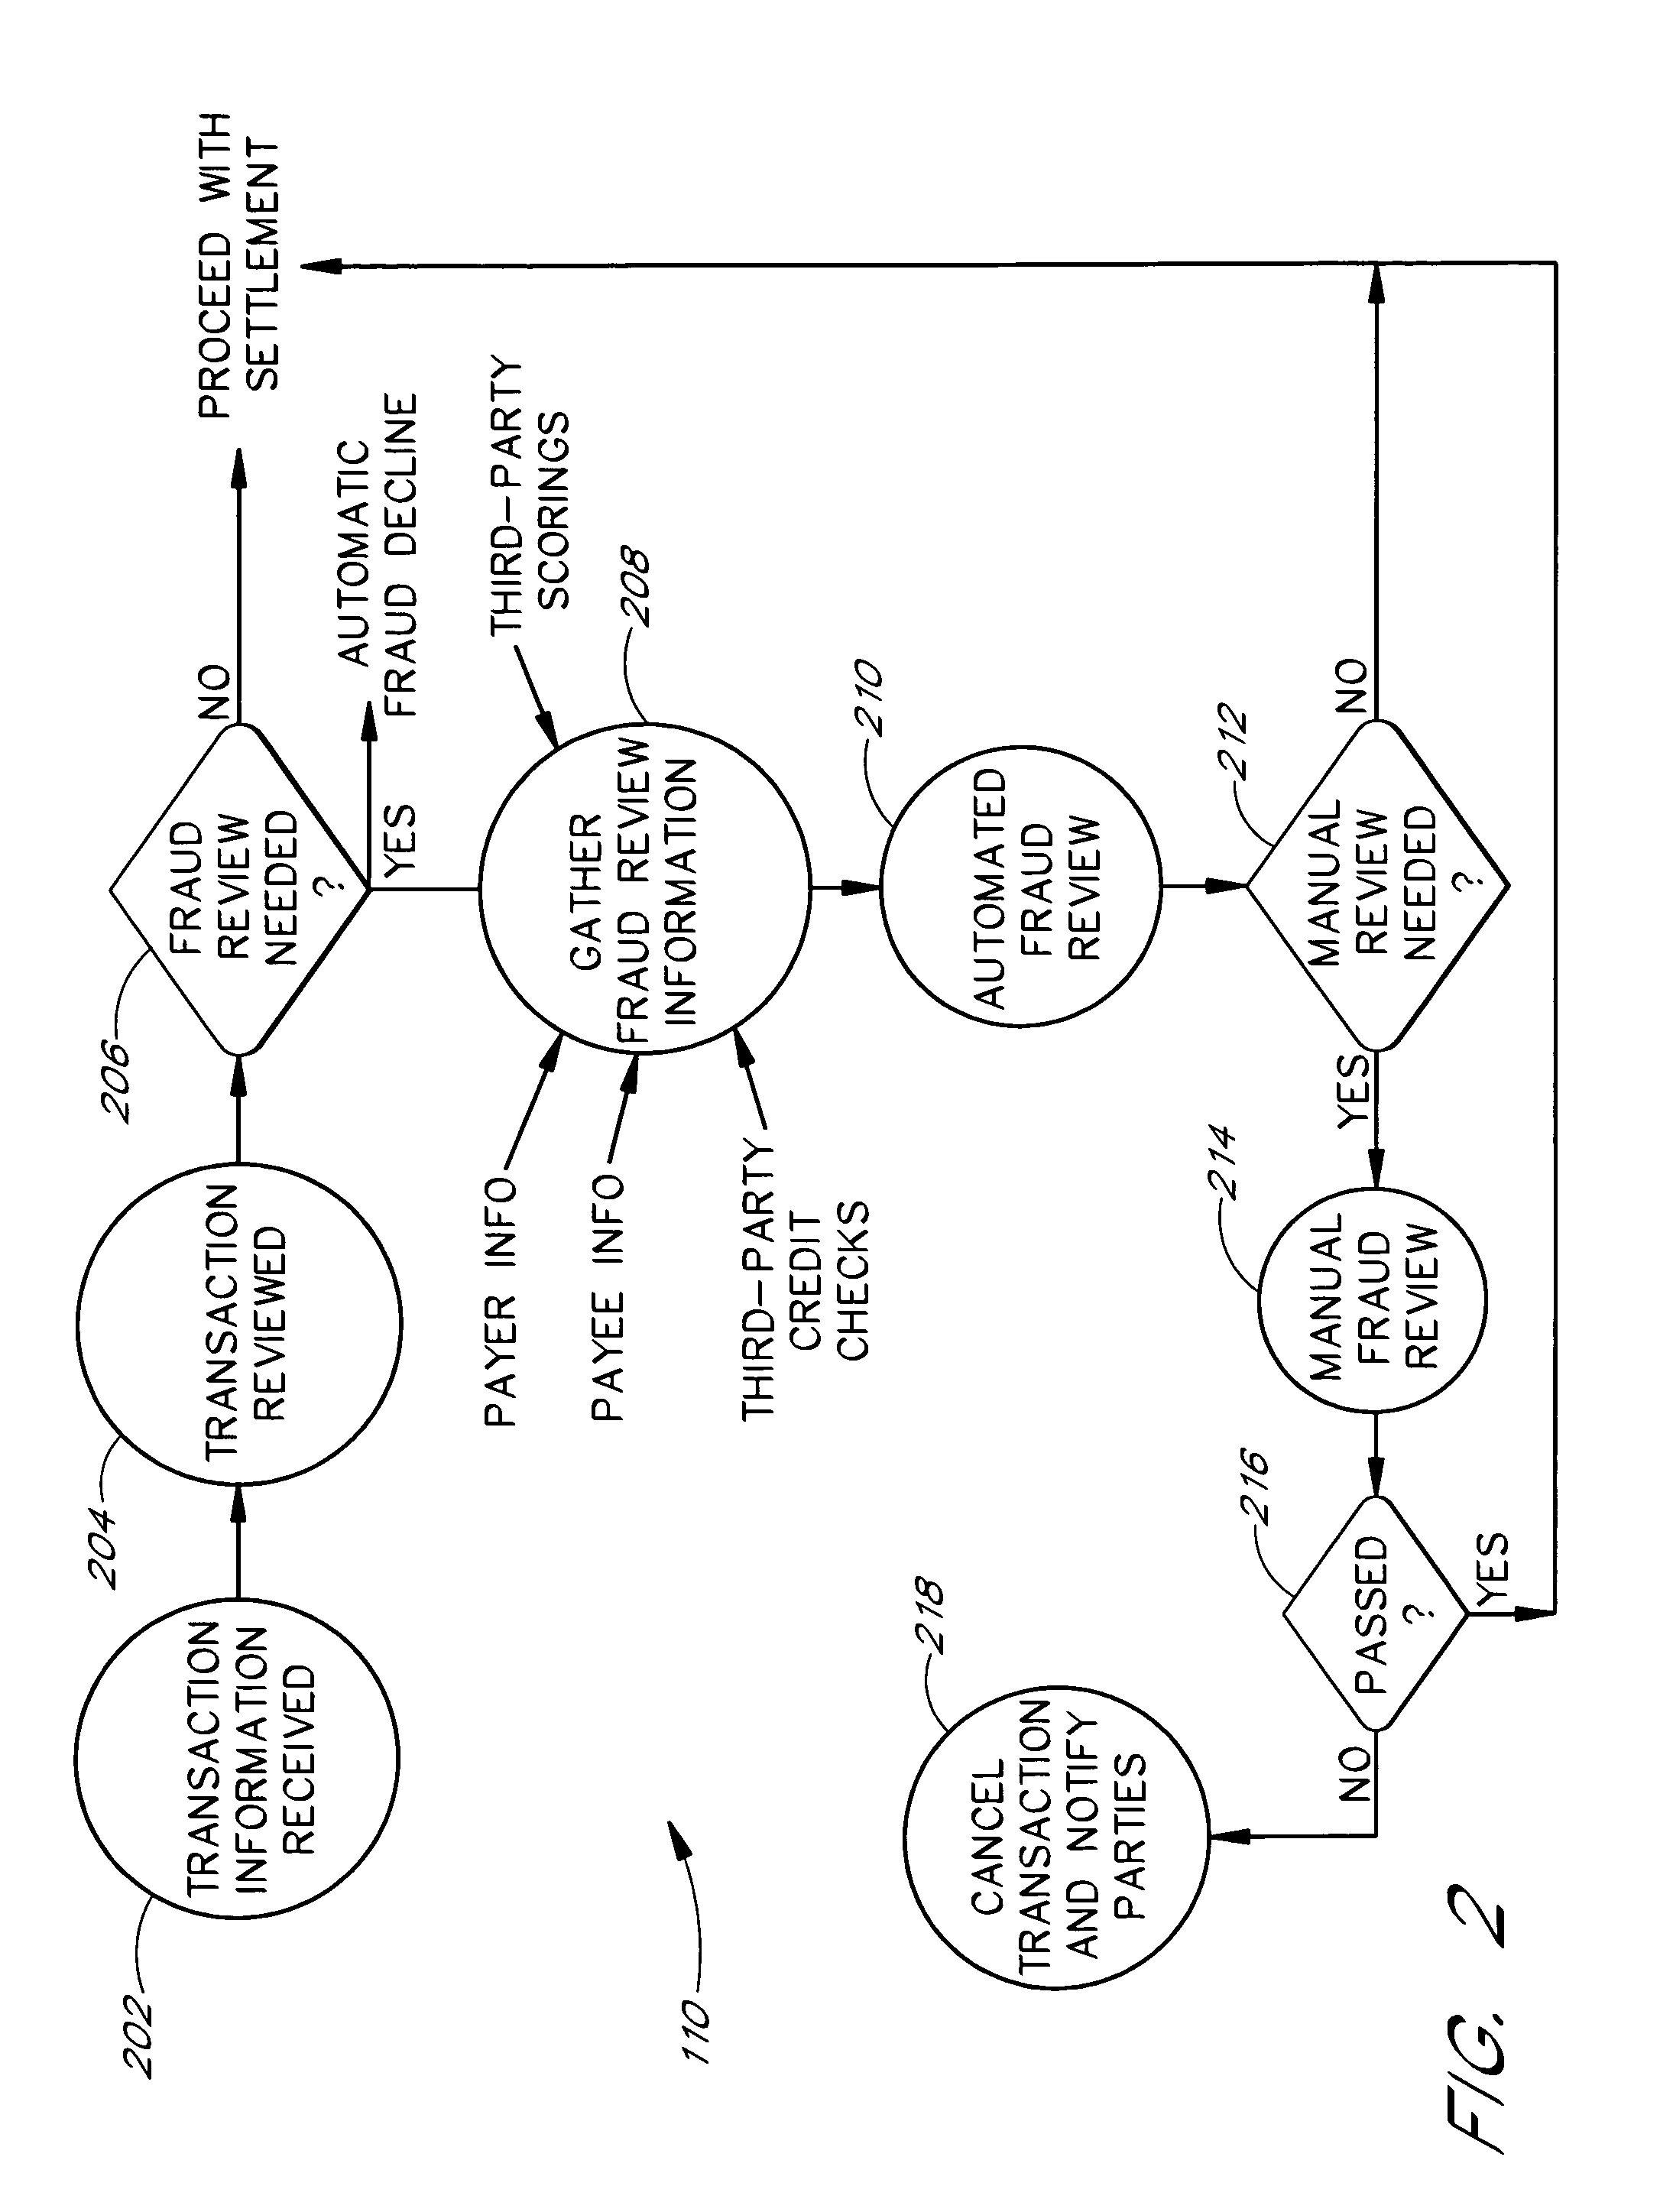 Computer-assisted funds transfer system